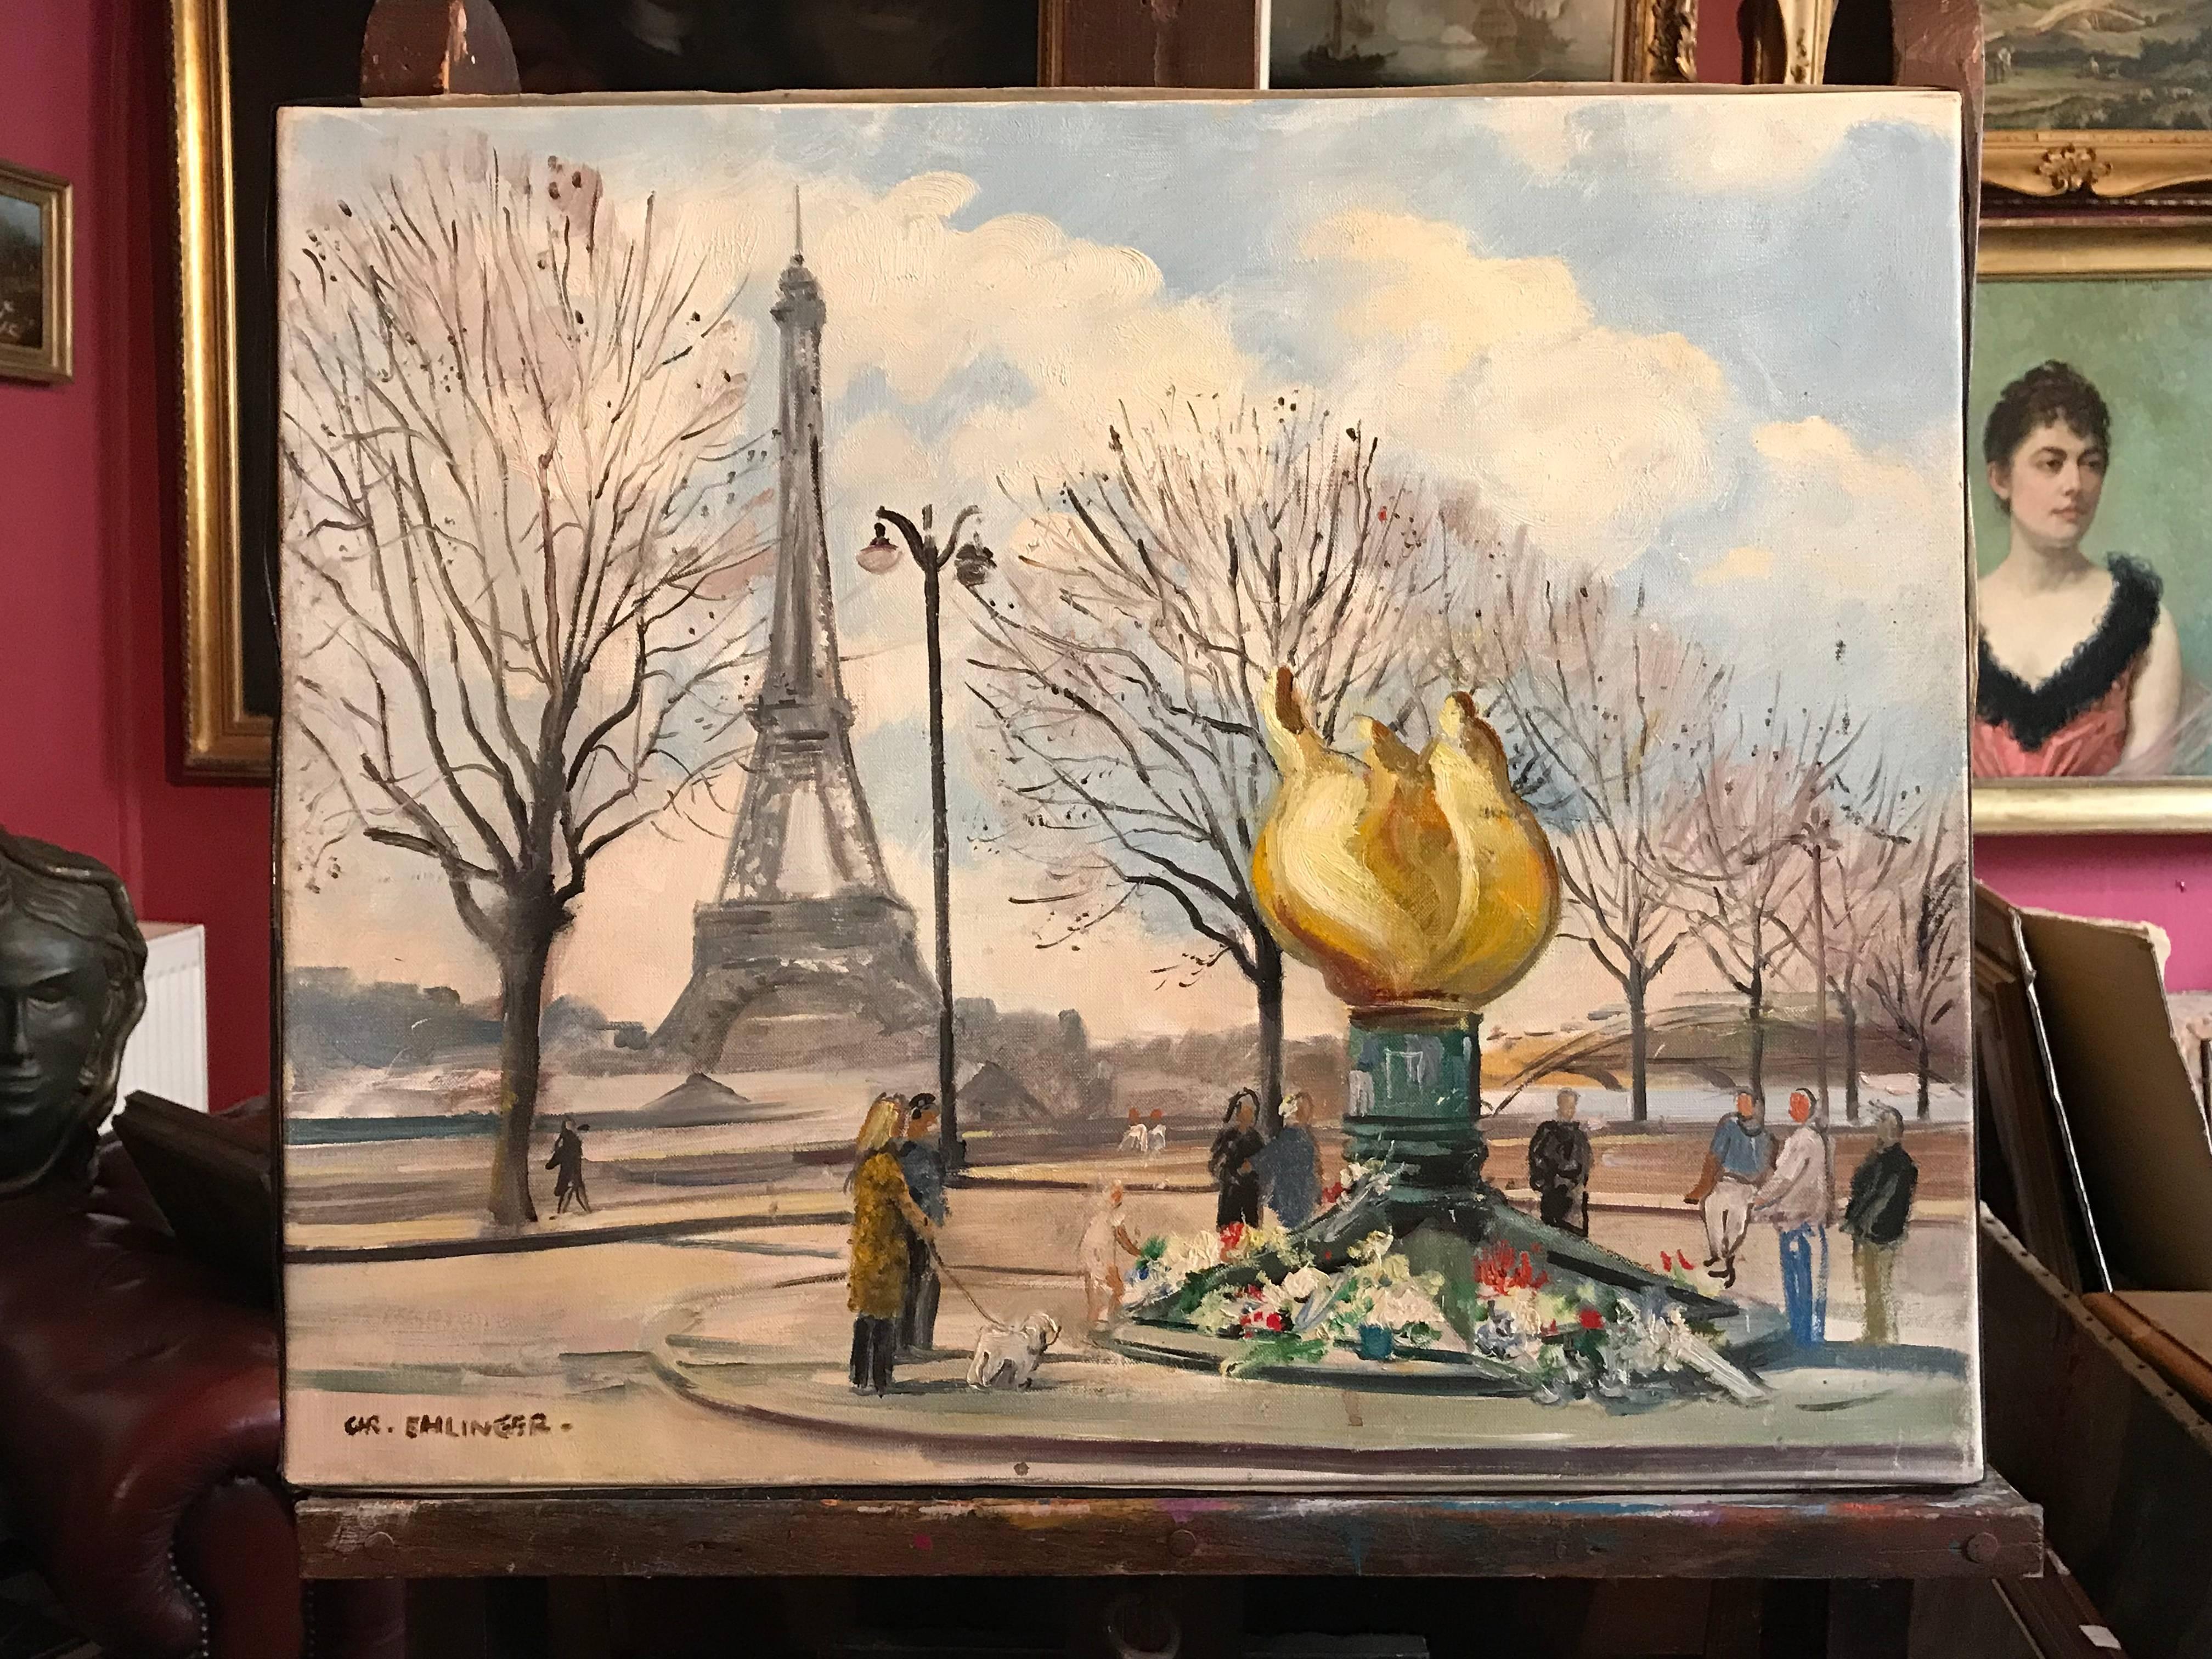 Flame of Liberty, Paris - Princess Diana's Memorial, signed oil painting - Painting by Christian Ehlinger